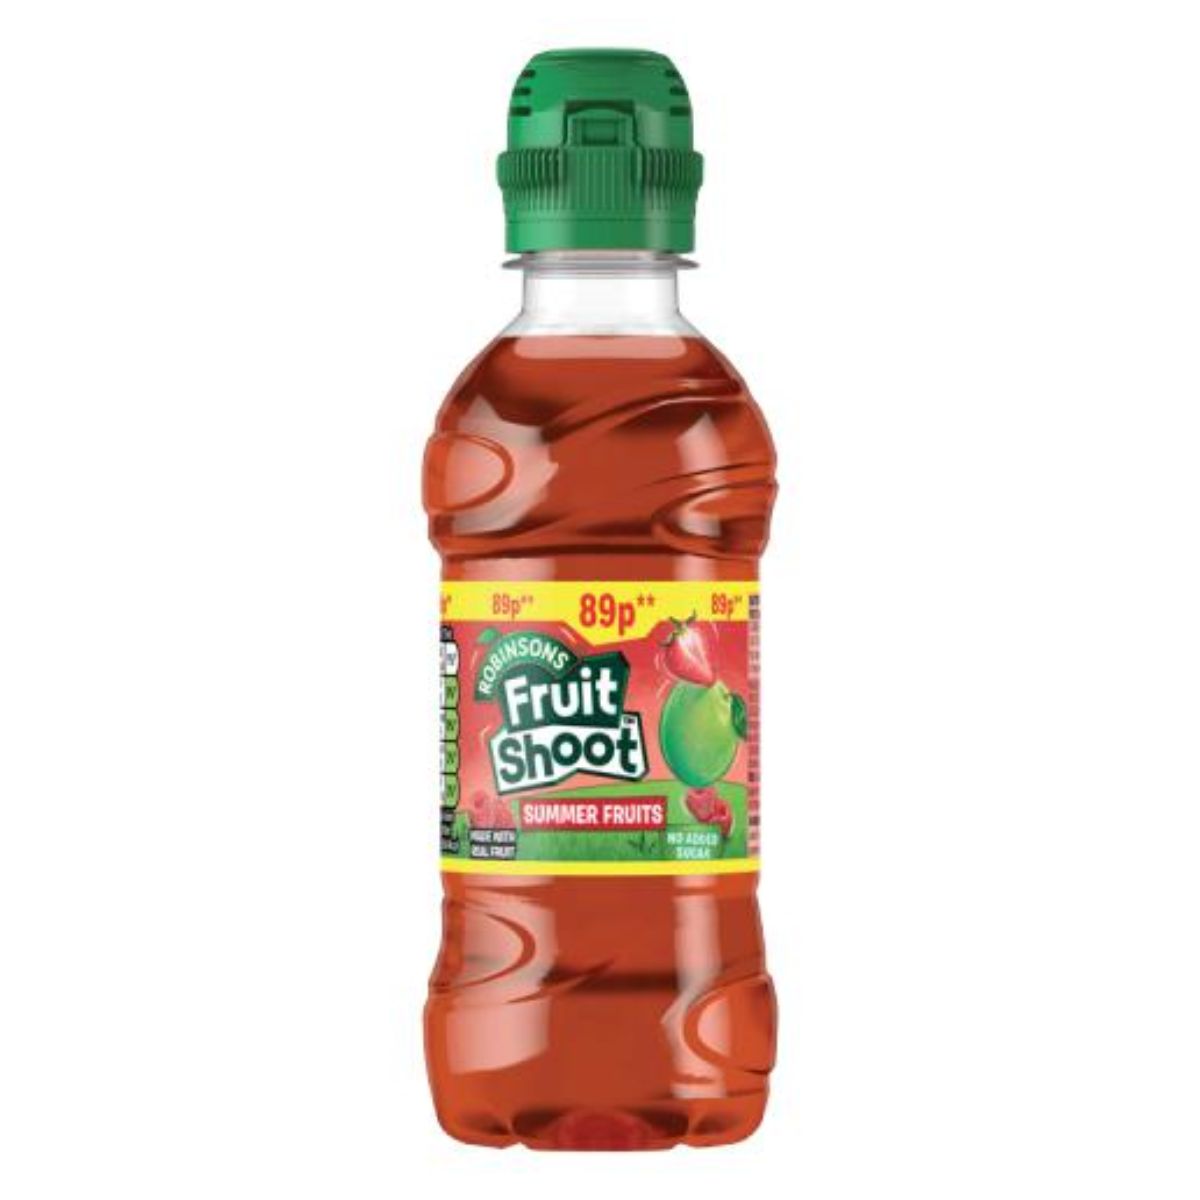 A Robinsons - Fruit Shoot Summer Fruits Juice Drink - 275ml on a white background.